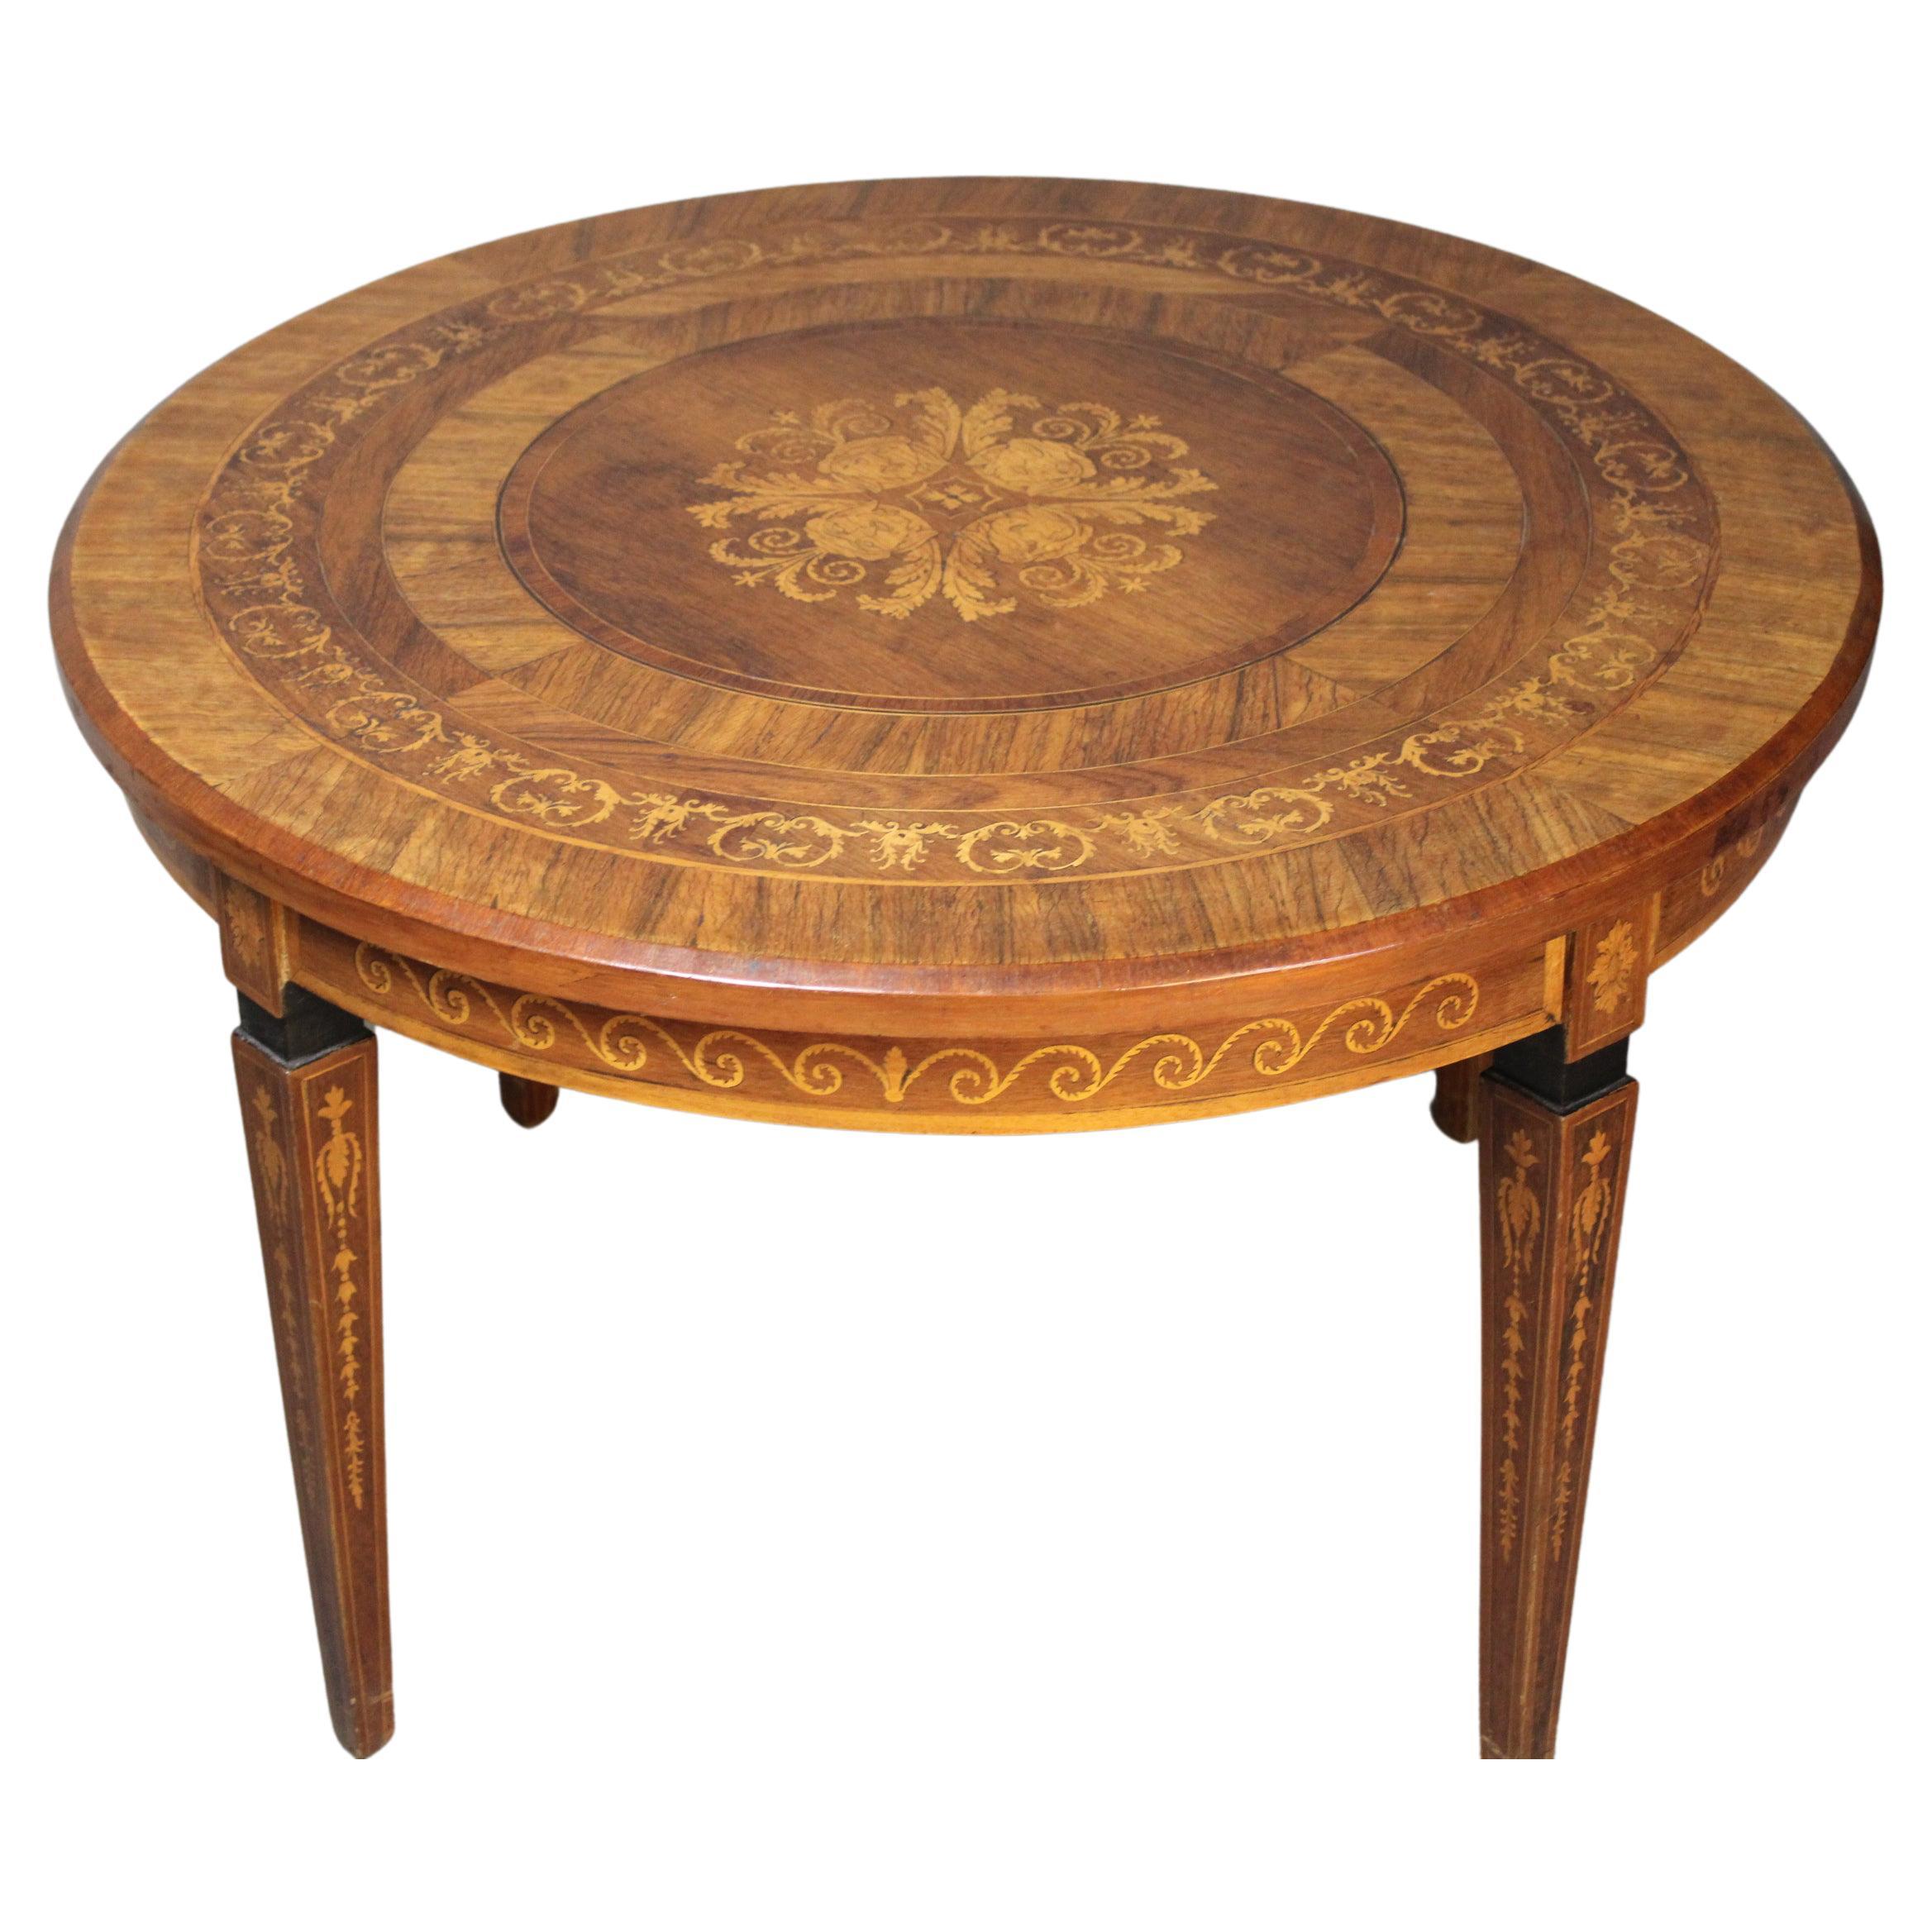 A French 1920 round burl walnut inlaid table in style of Louis XVI
This French center table will bring a distinguished touch to any room, from a foyer to a living room.

 